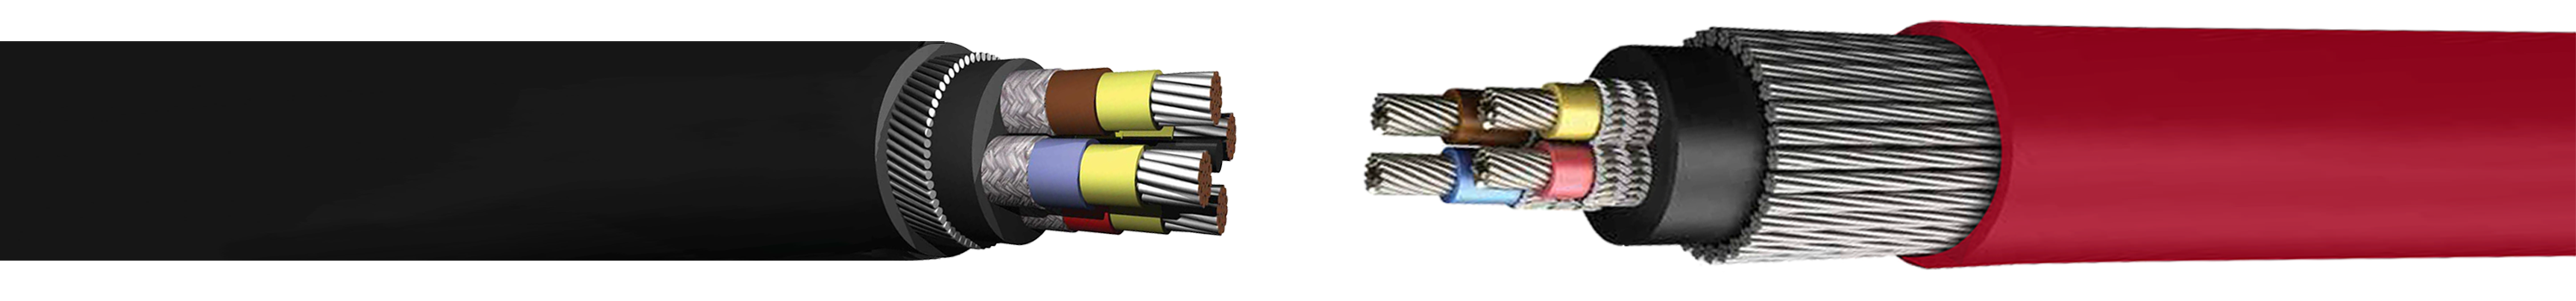 TYPE-62-63-64-MINING-CABLES